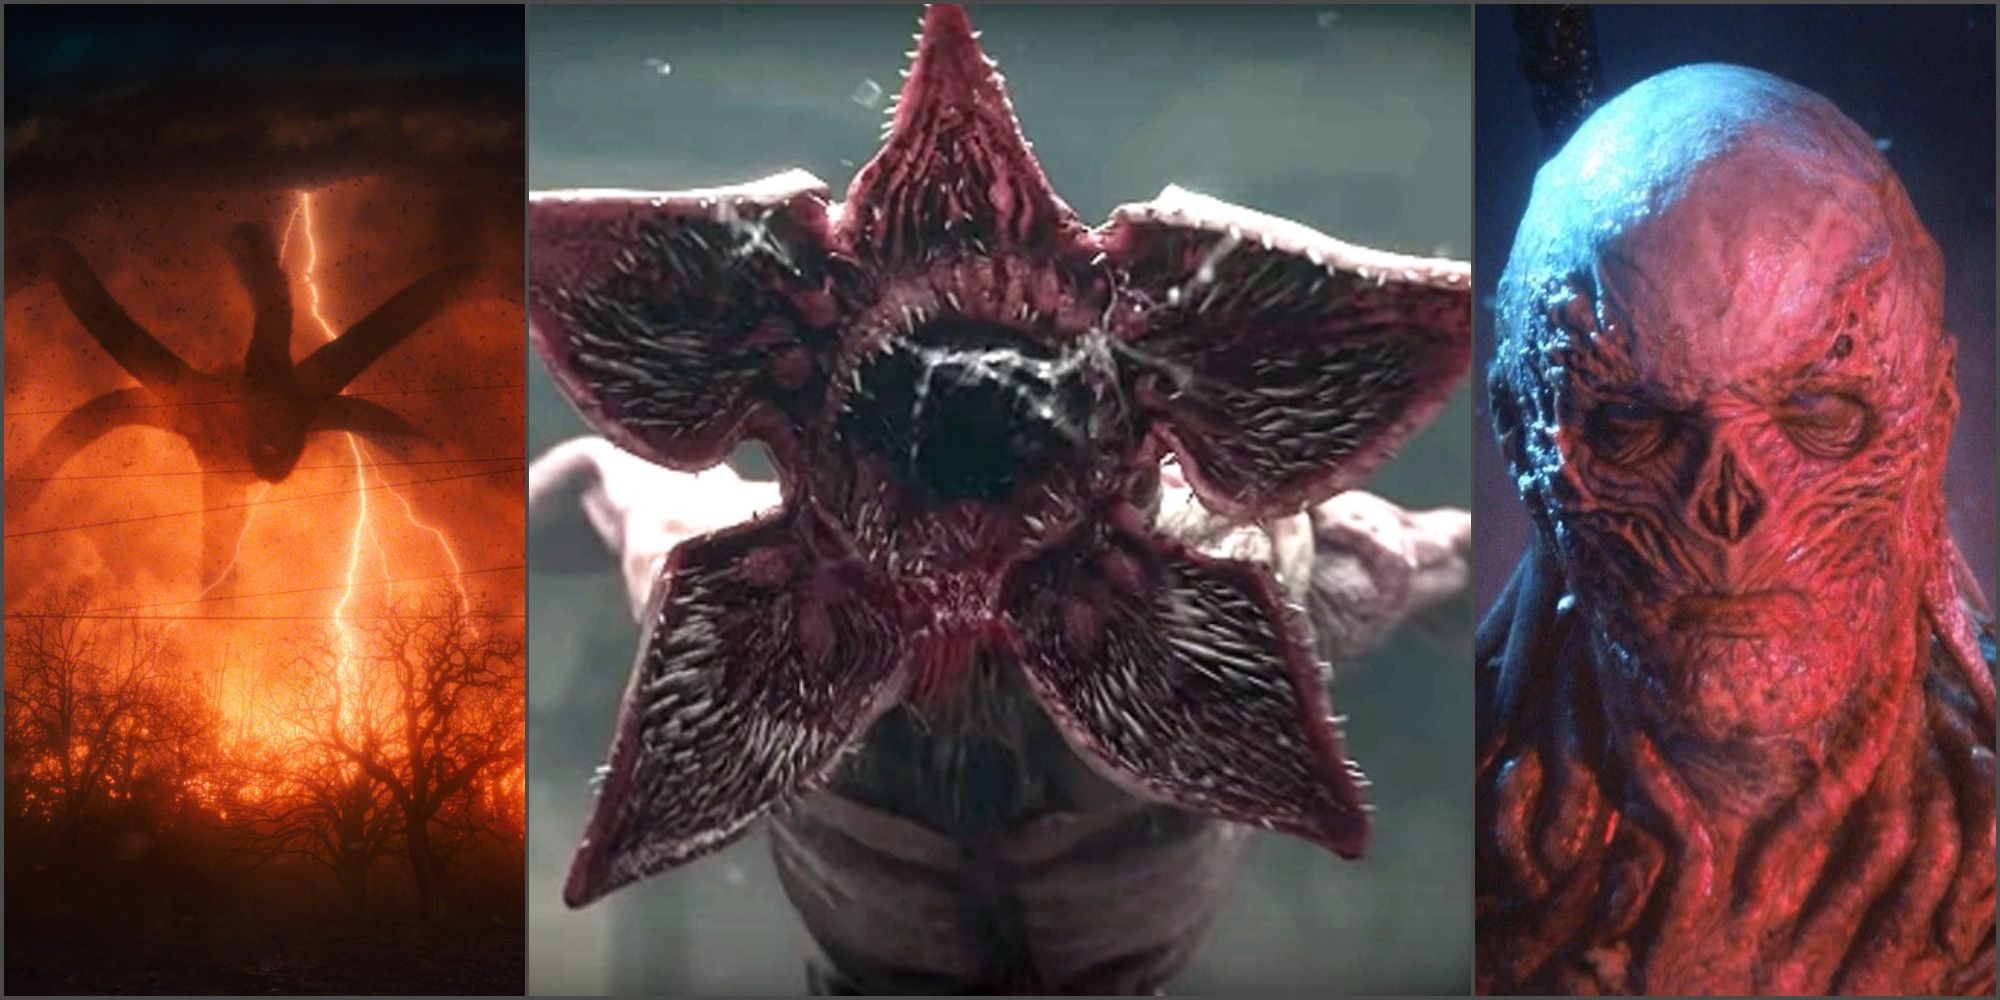 How Will Stranger Things End? The Biggest Season 5 Theories